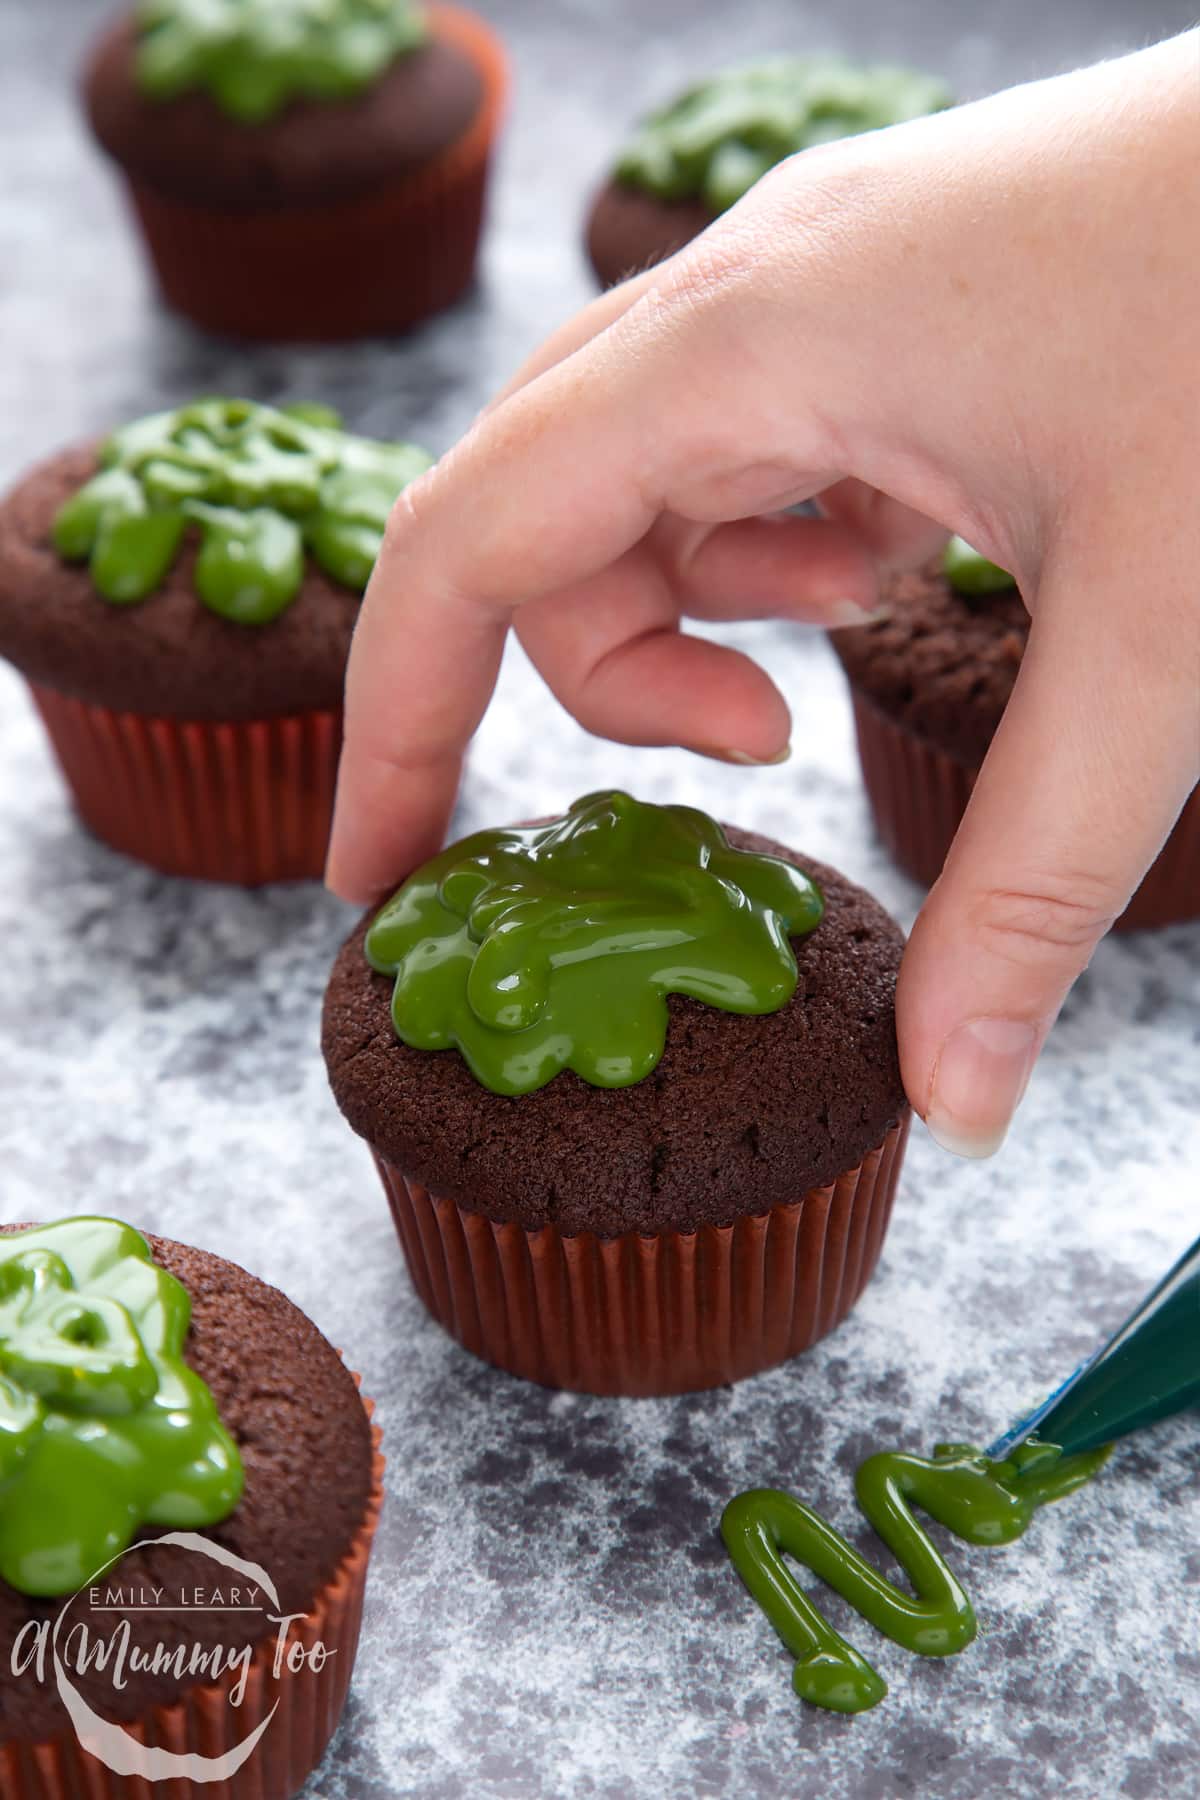 Slime cupcakes on a black backdrop. The cakes have a chocolate sponge topped with dyed-green caramel. A hand reaches to take one.